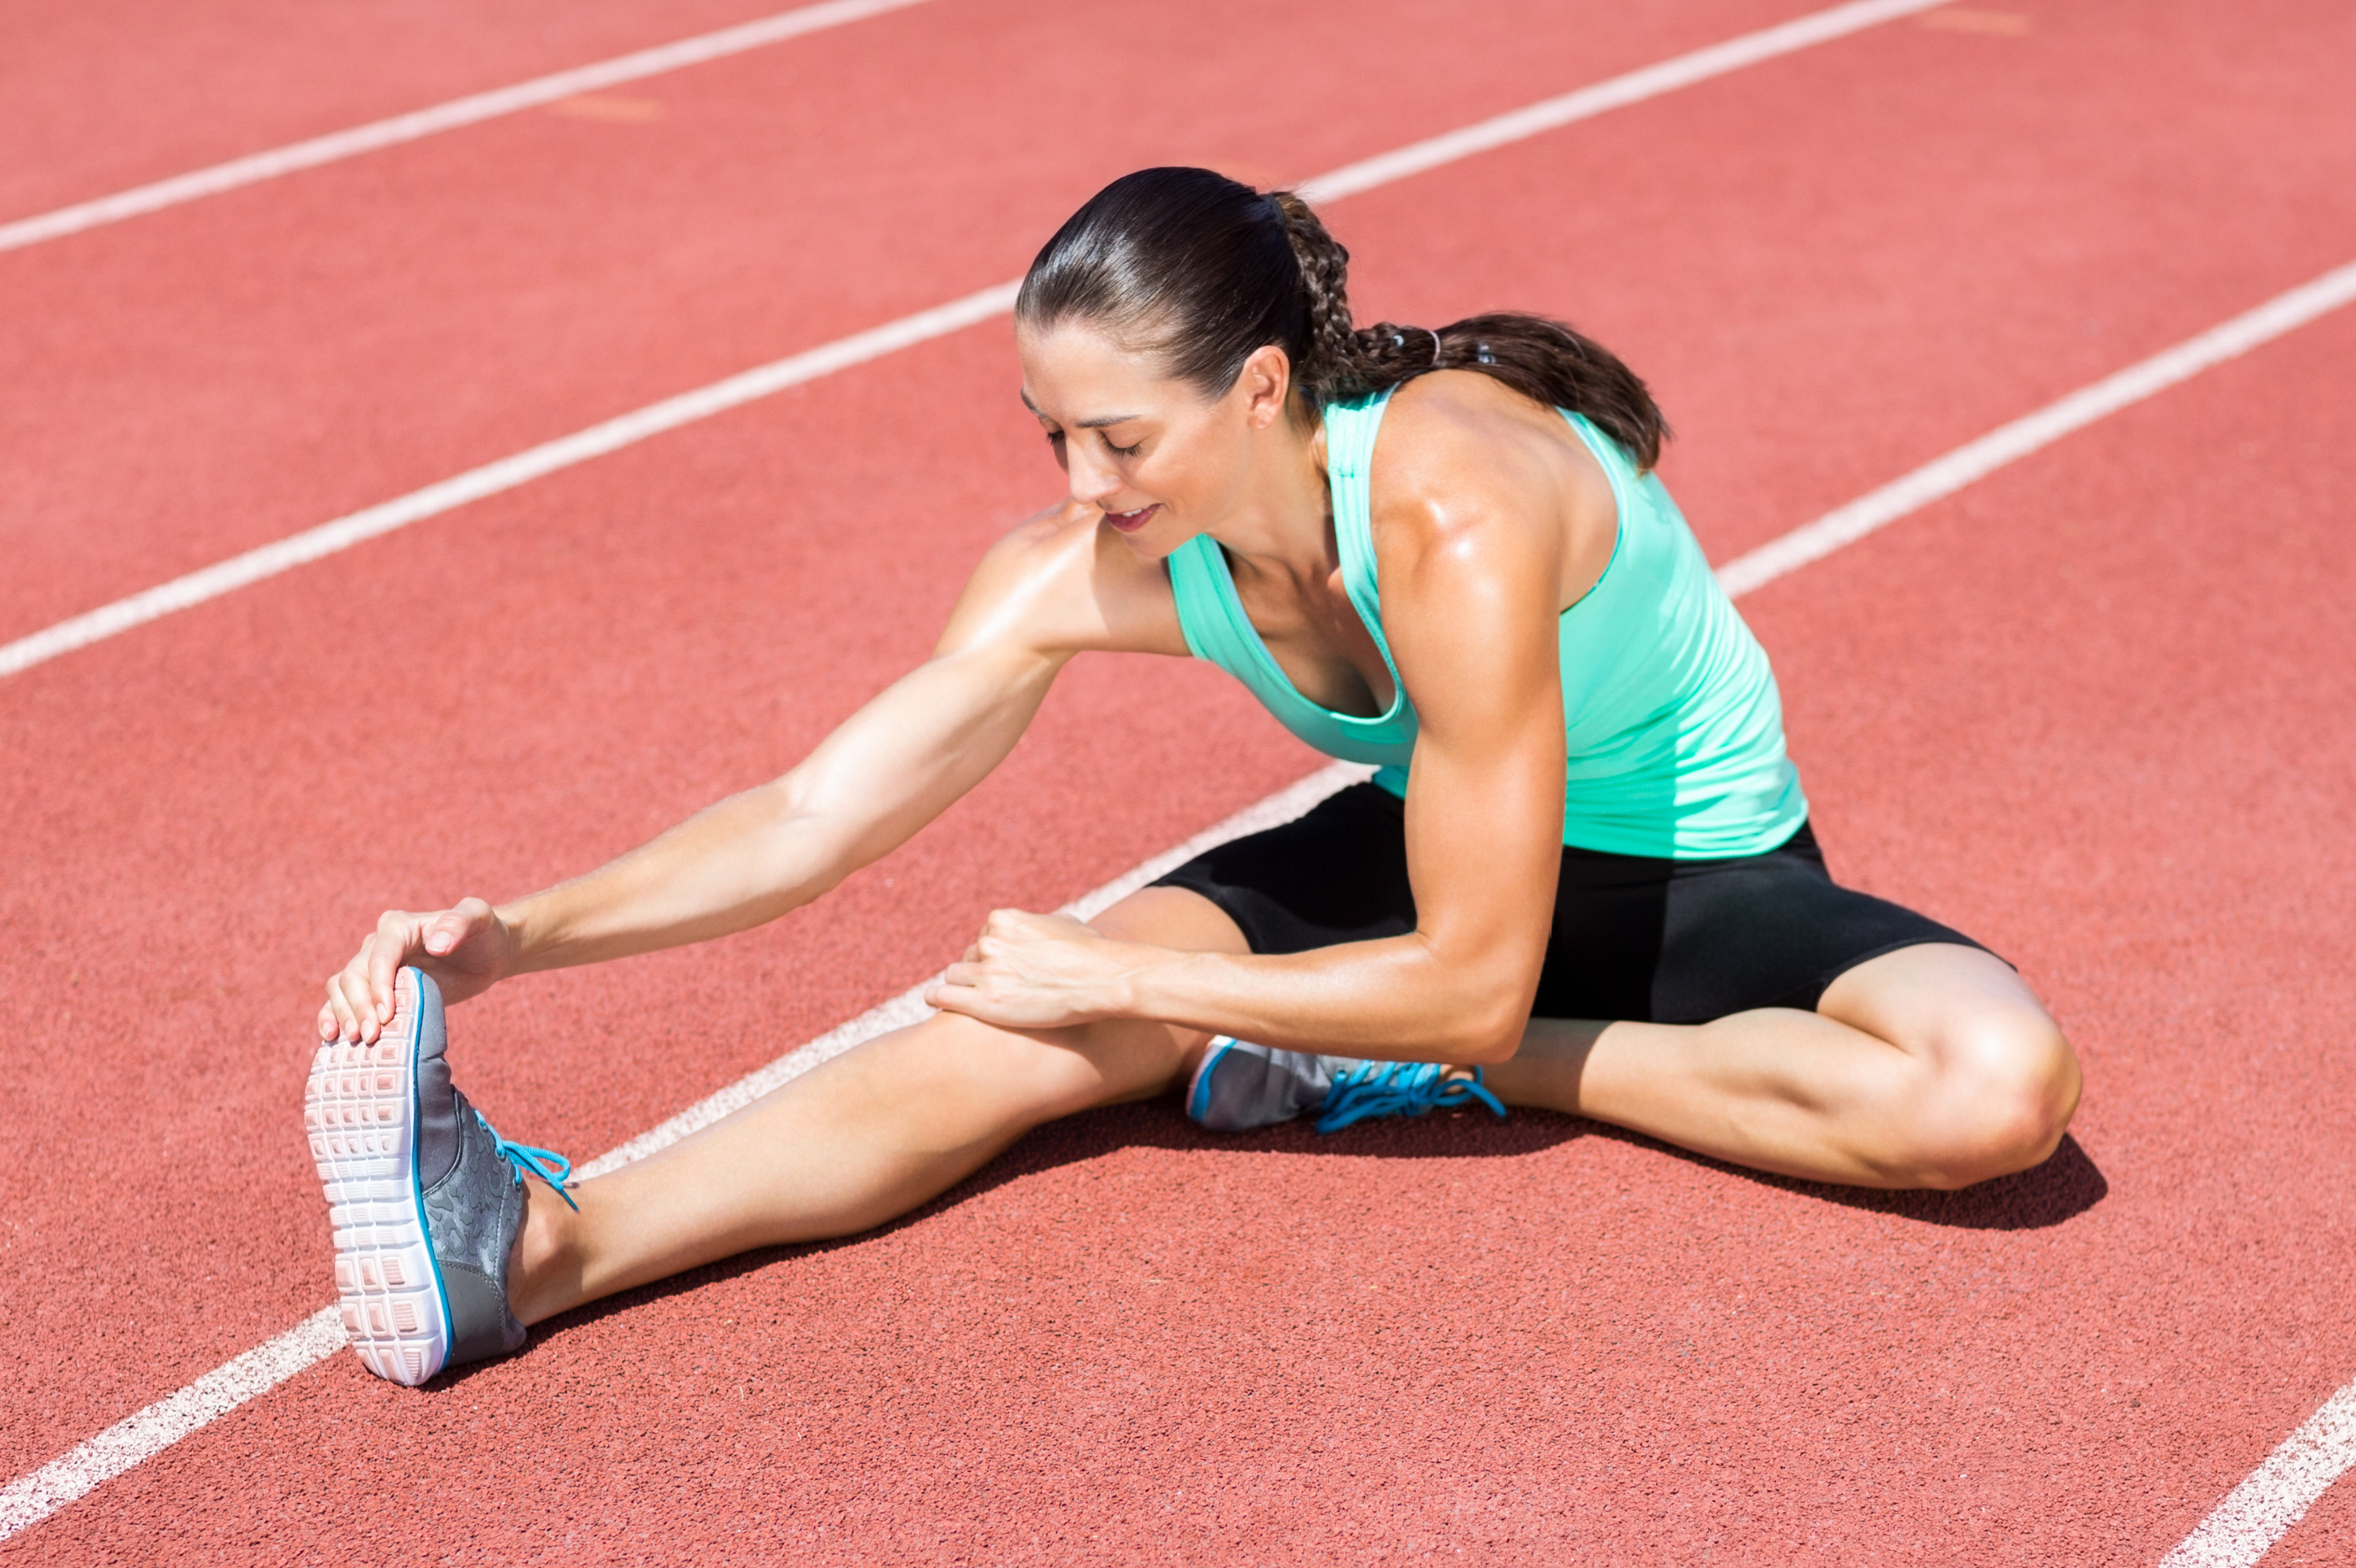 You must be careful when stretching a pulled hamstring.